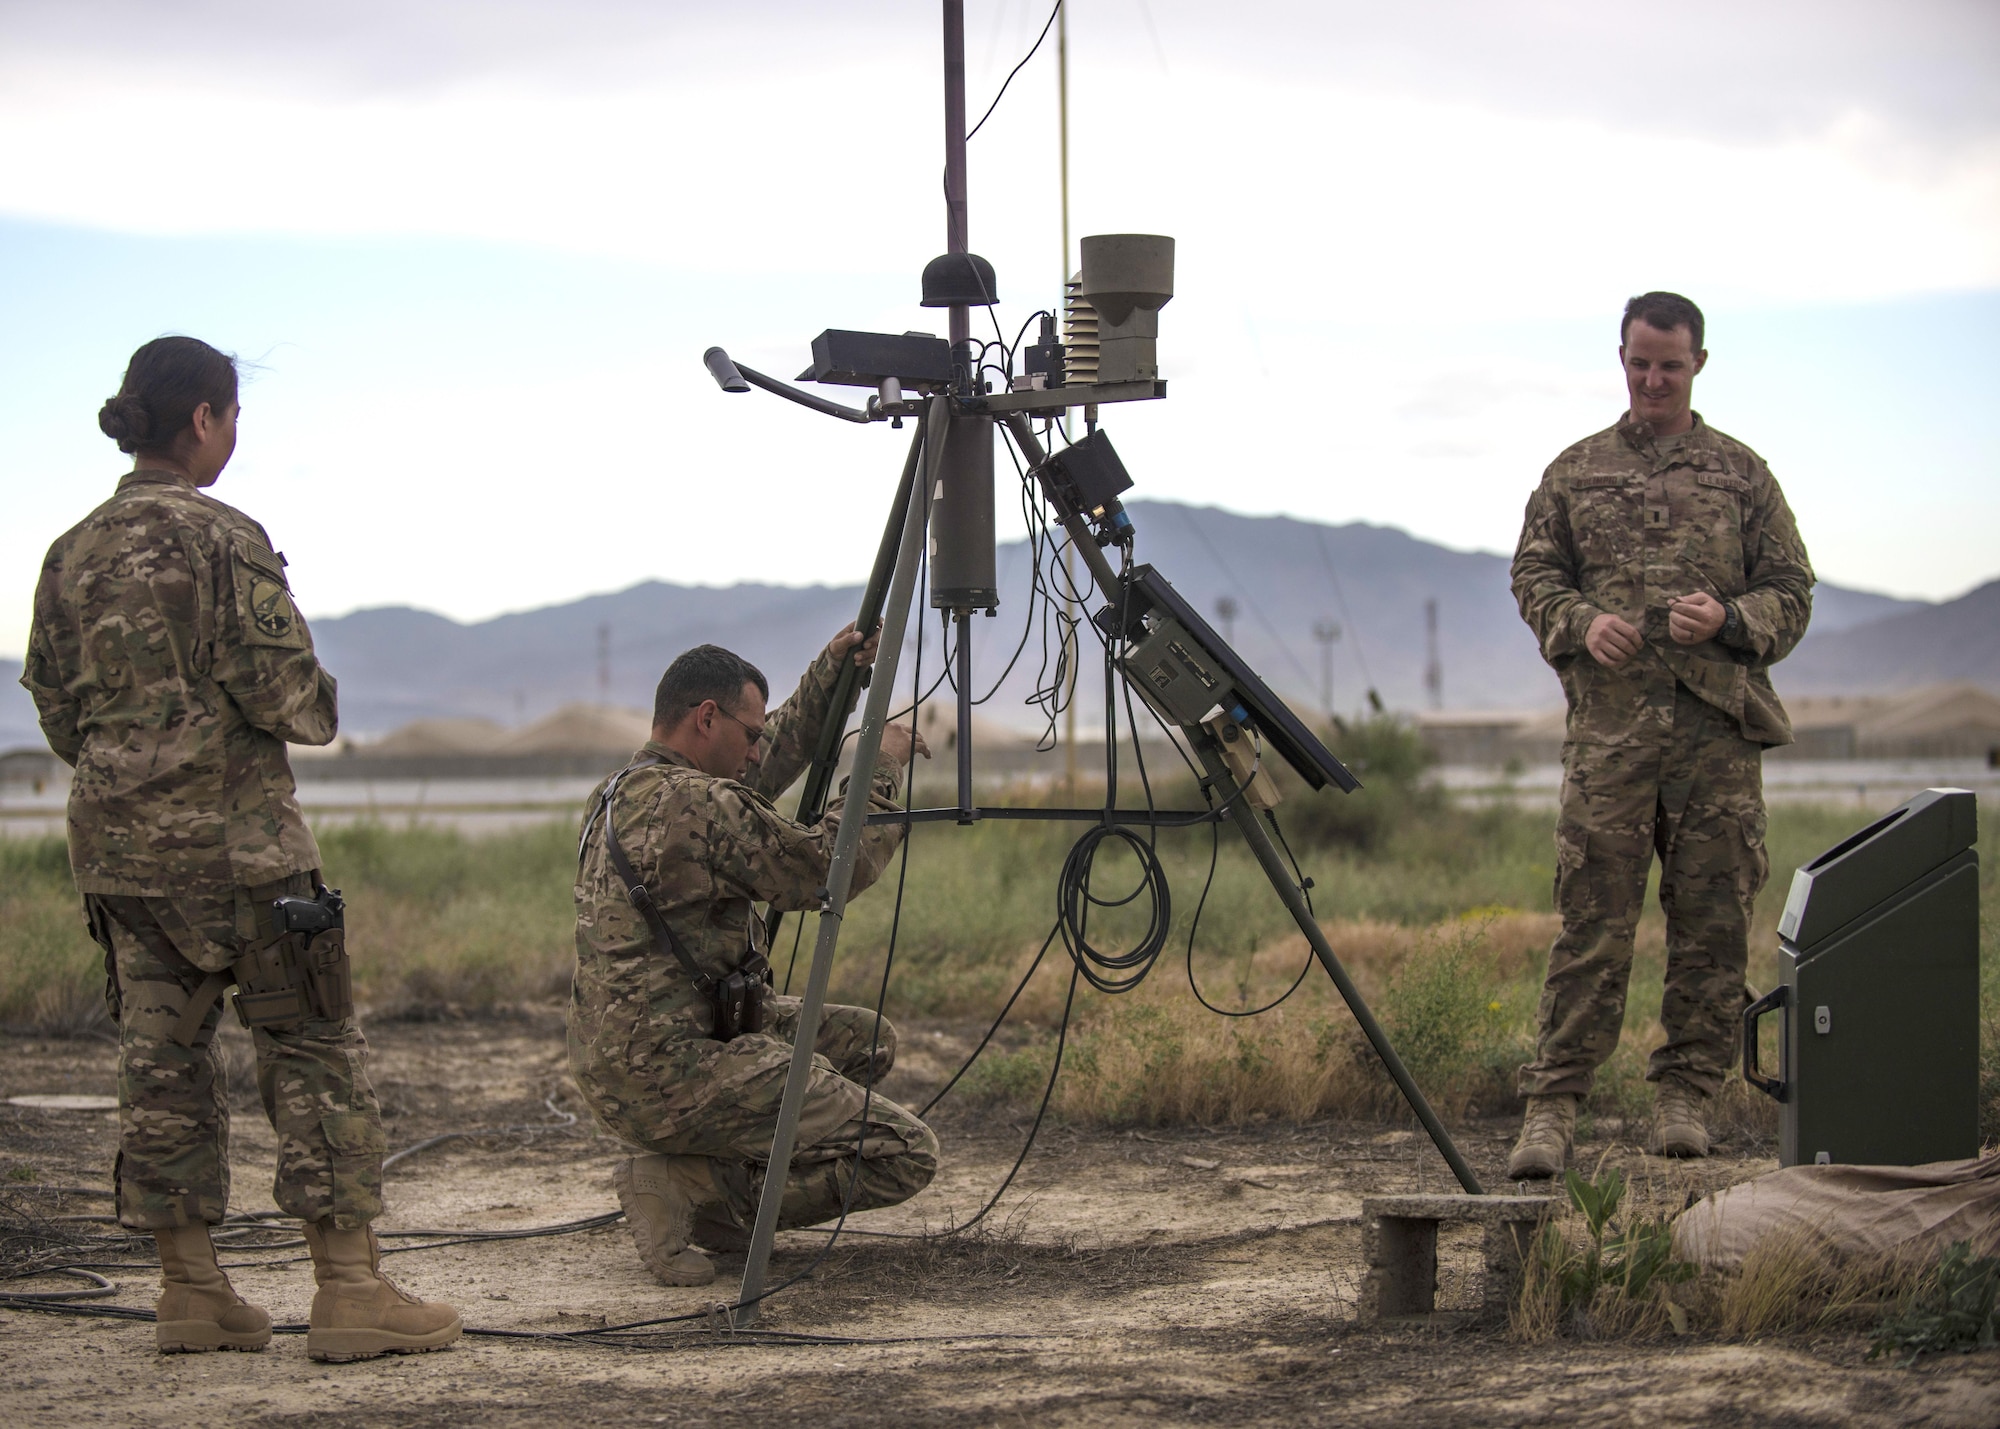 Members of the 455th Expeditionary Operations Support Squadron conduct an inspection of a Tactical Meteorological Observation System, or TMQ-53, at Bagram Airfield, Afghanistan, May 16, 2016. The TMQ-53 collects weather data that includes wind speed and direction, temperature, humidity, cloud height, precipitation and lightning. This data is compiled with more than 100 years of climatological observations stored by the 14th Weather Squadron in Asheville, North Carolina. (U.S. Air Force photo by Senior Airman Justyn M. Freeman)